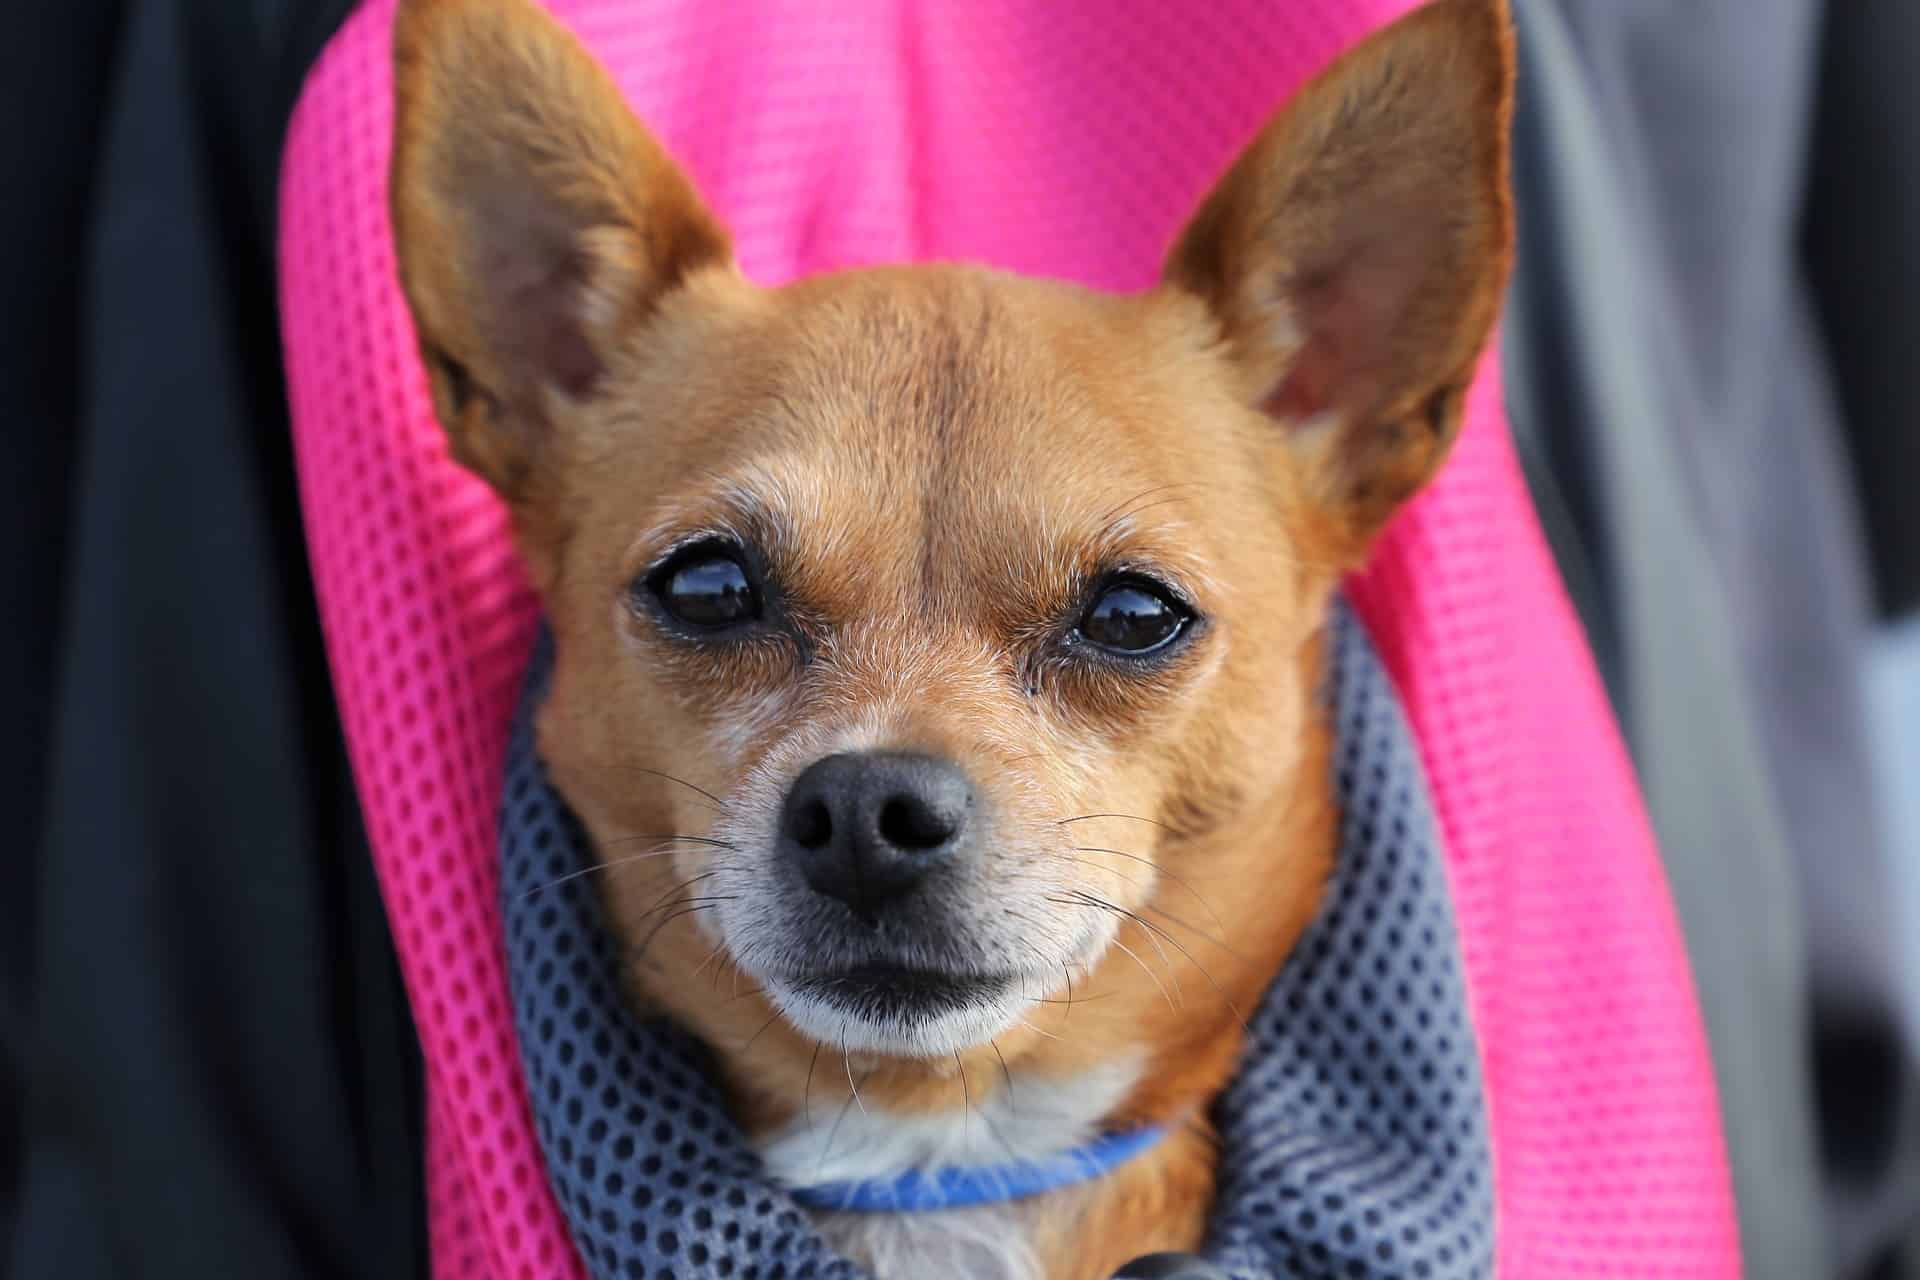 Small tan and white dog with brown eyes sits in a pink cloth carrier looking at the camera